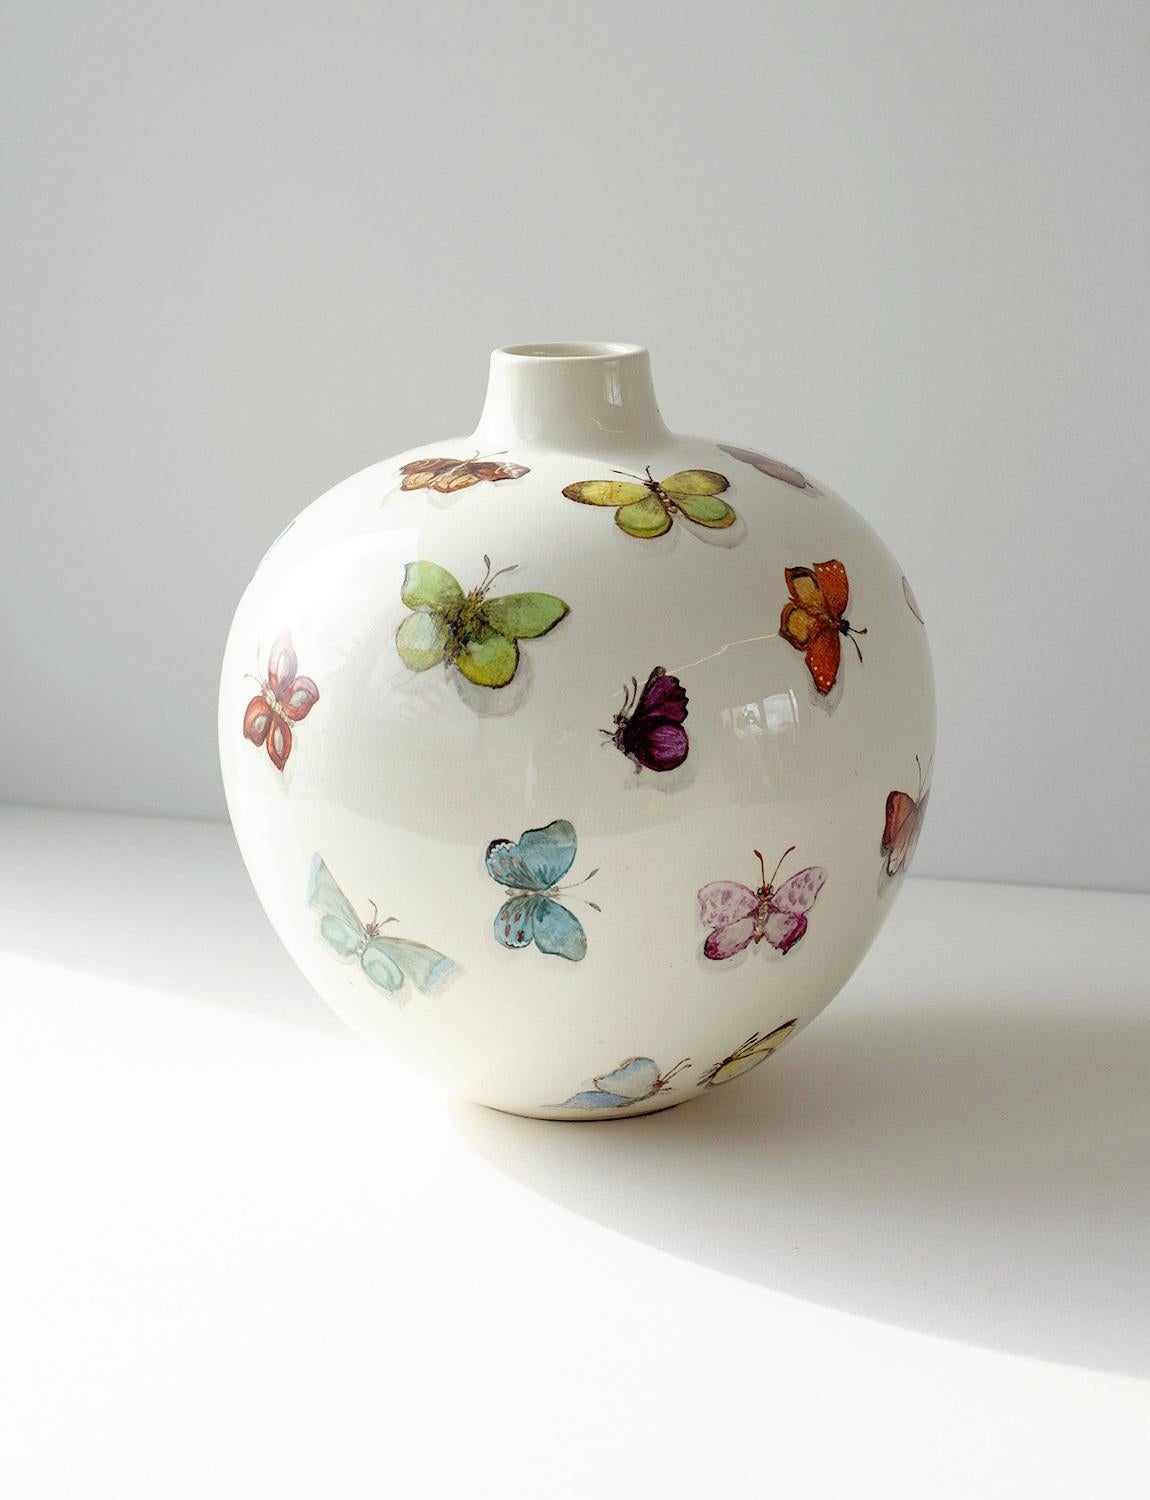 This exceptionally rare and beautiful Butterfly Vase was designed by Guido Andlovitz for the ceramics house, Società Ceramica Italiana, Lavenia where he was the Art Director in the 1930s. This shape and style of Andlowitz vase vase is documented in